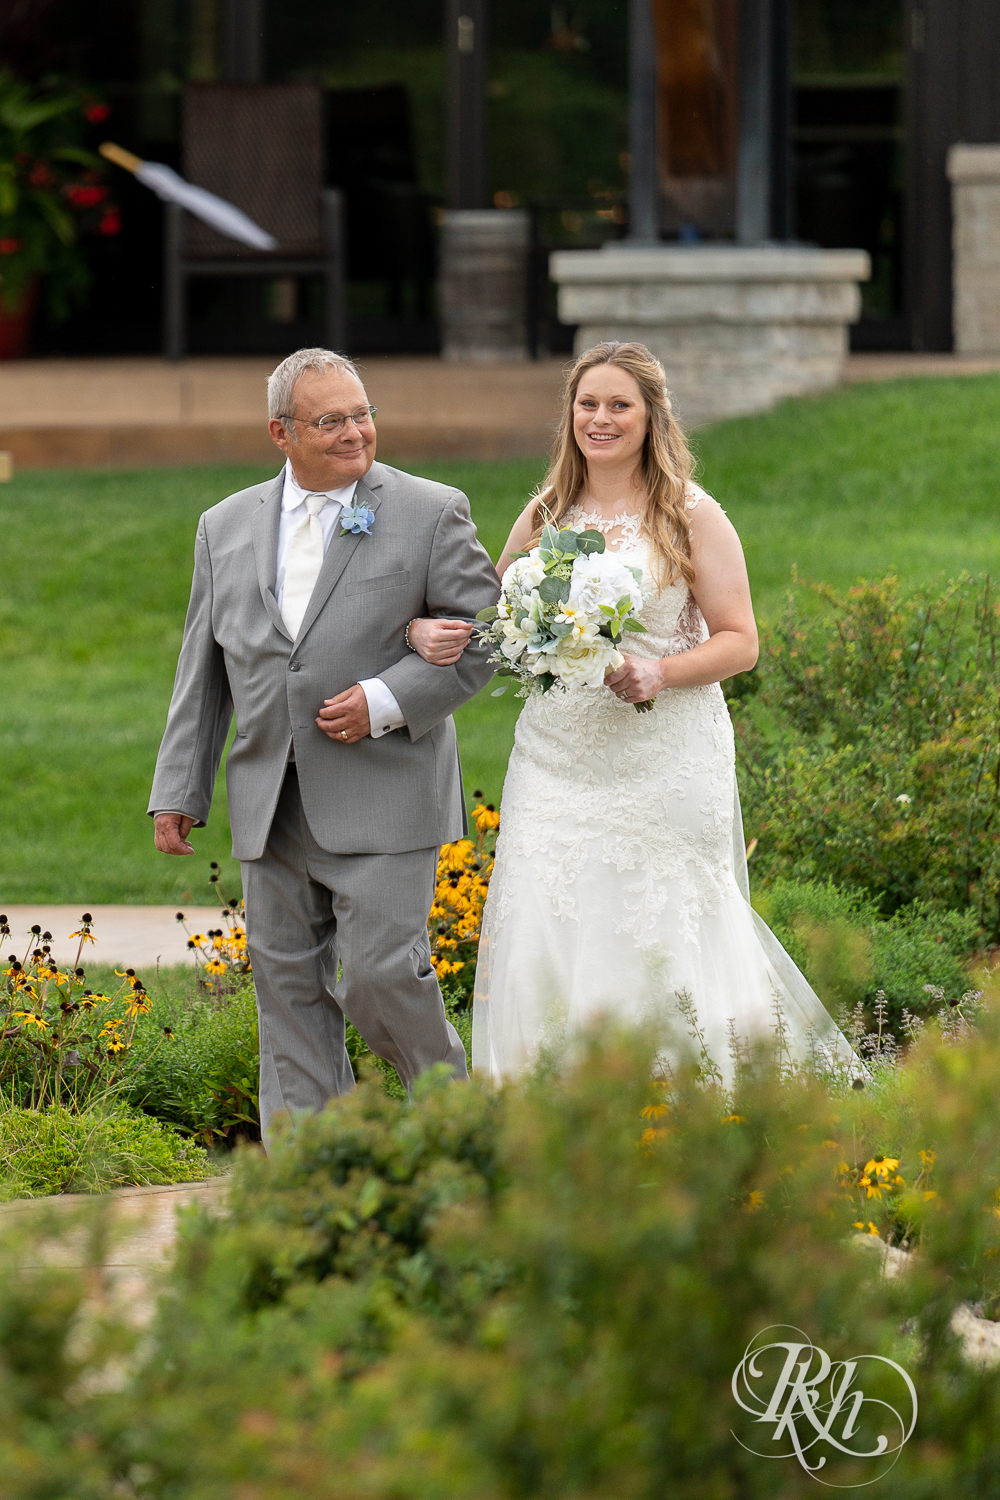 Bride walking down the aisle with her dad at 7 Vines Vineyard in Dellwood, Minnesota.